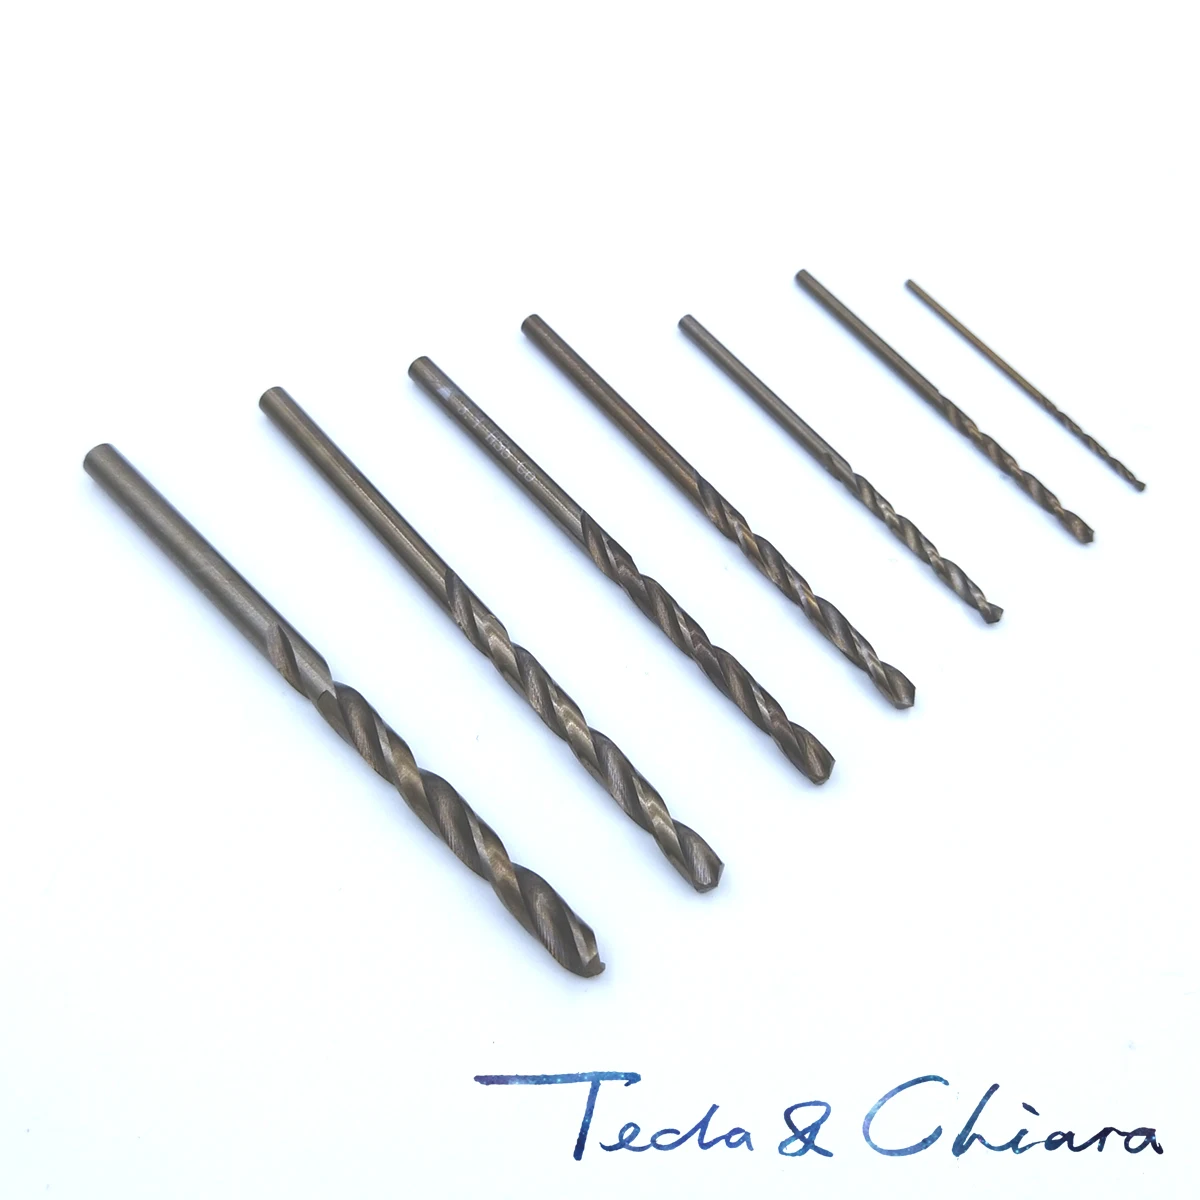 5 5.0 5.1 5.2 5.3 5.4 5.5 5.6 5.7 5.8 5.9 mm HSS-CO M35 Cobalt Steel Straight Shank Twist Drill Bits For Stainless Steel